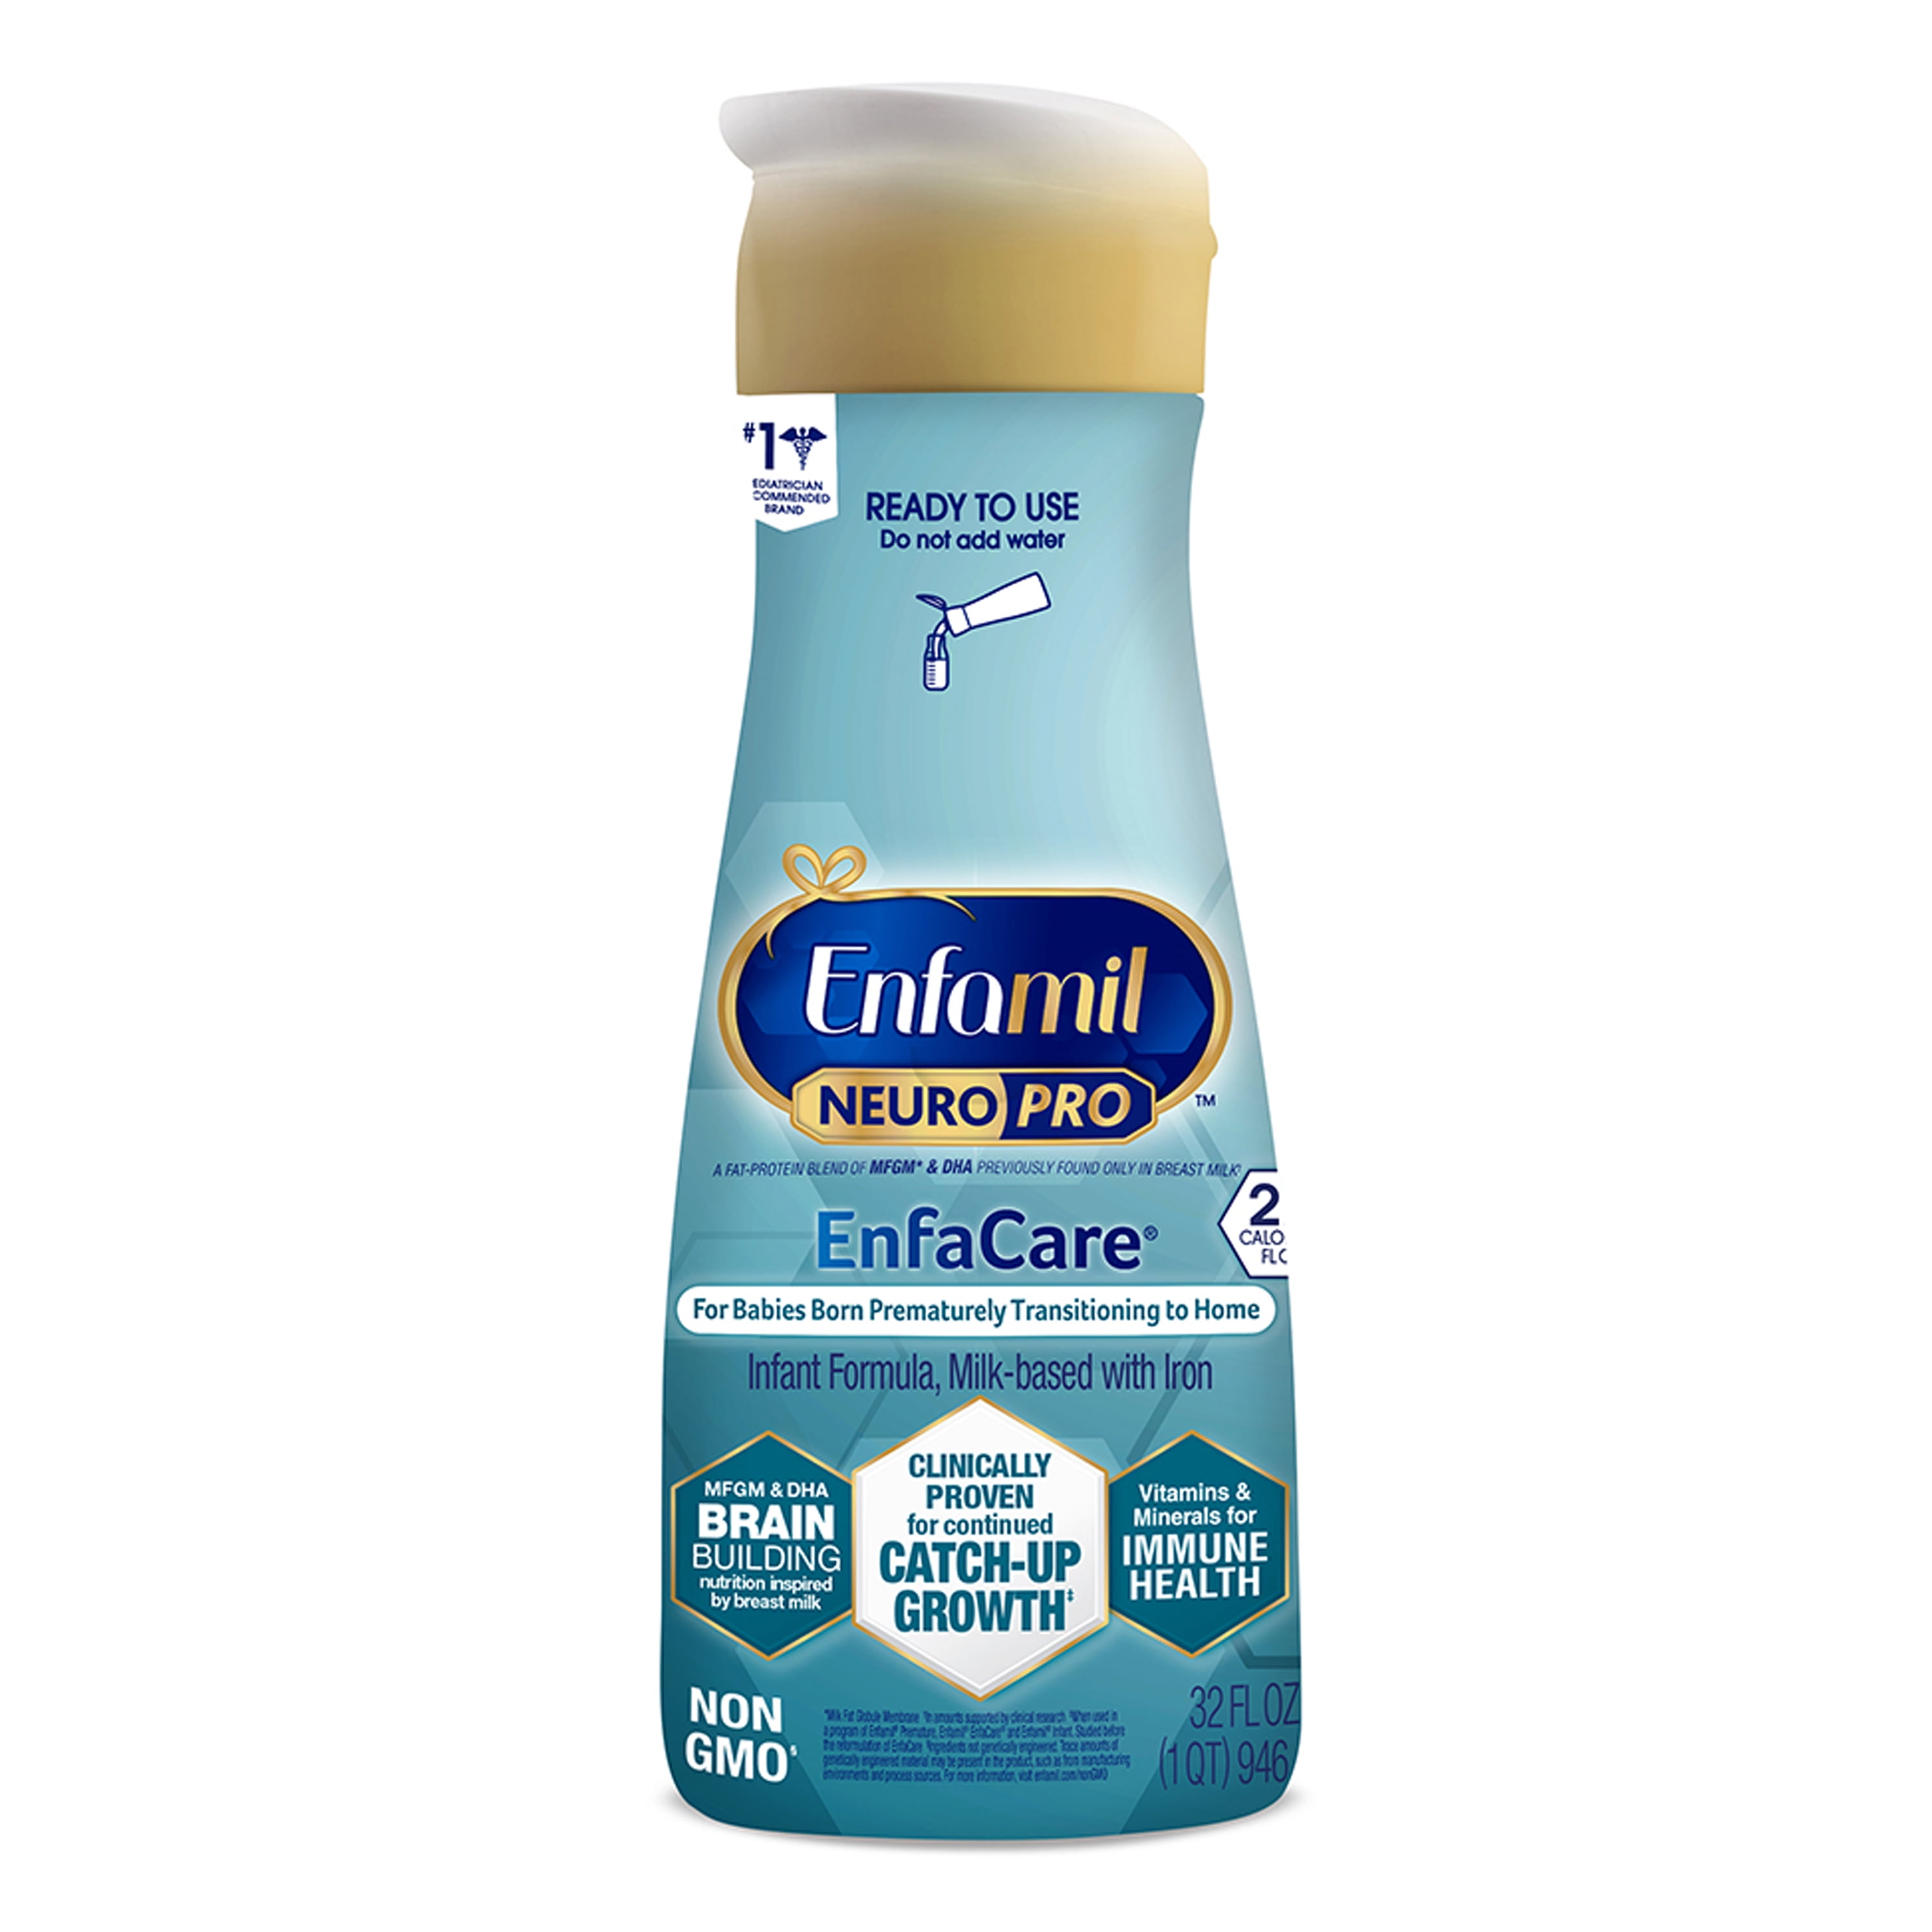 enfamil 22 calorie formula ready to use